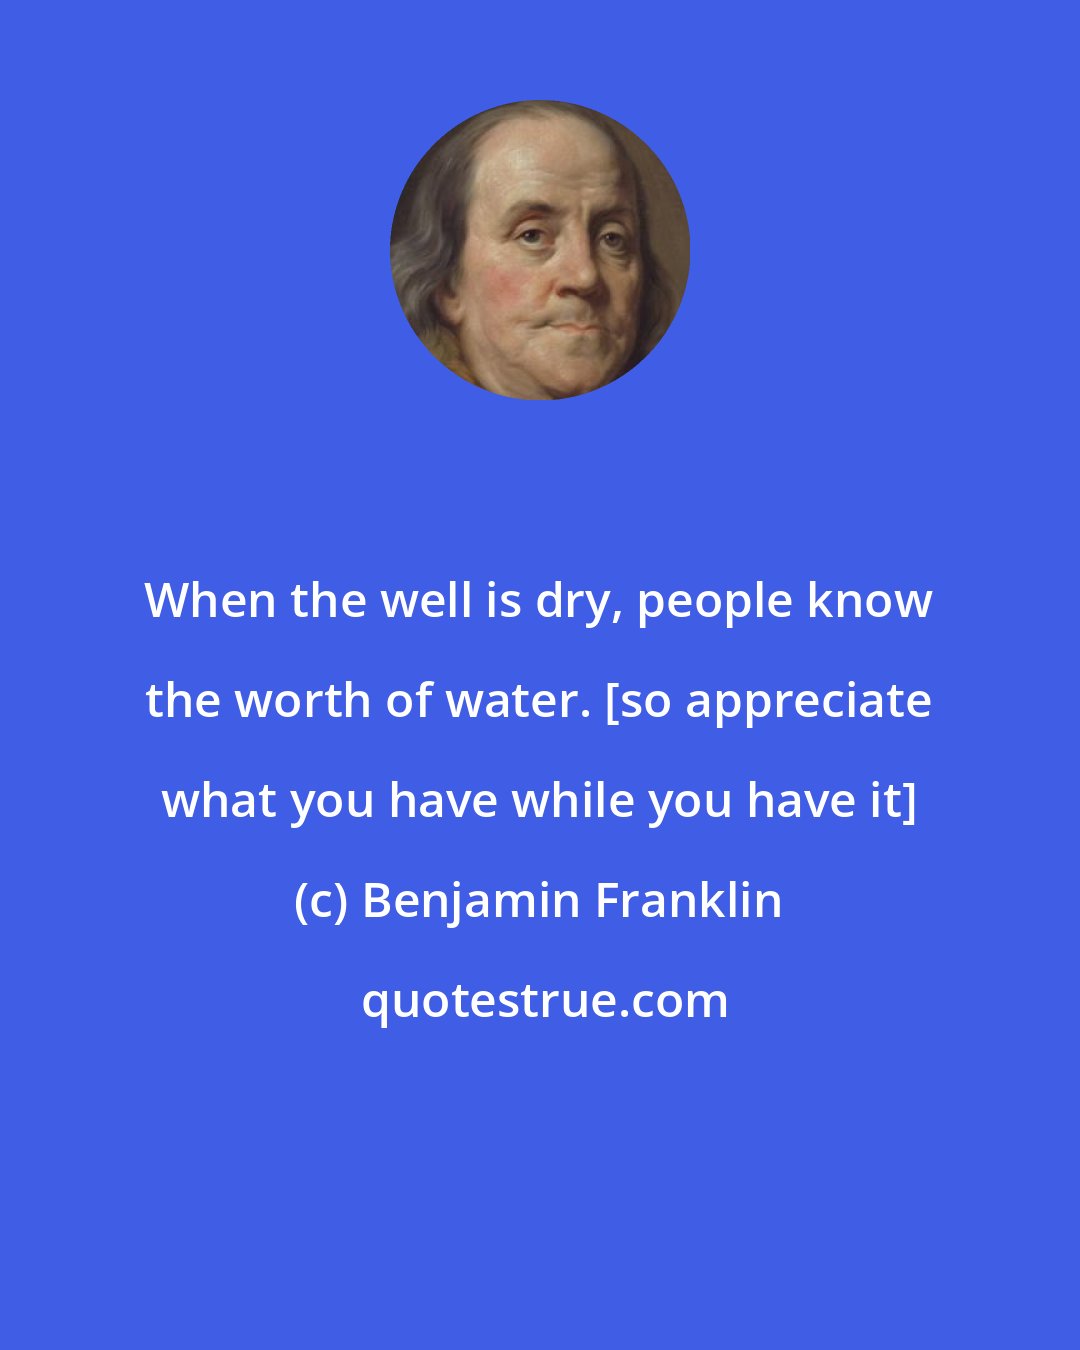 Benjamin Franklin: When the well is dry, people know the worth of water. [so appreciate what you have while you have it]